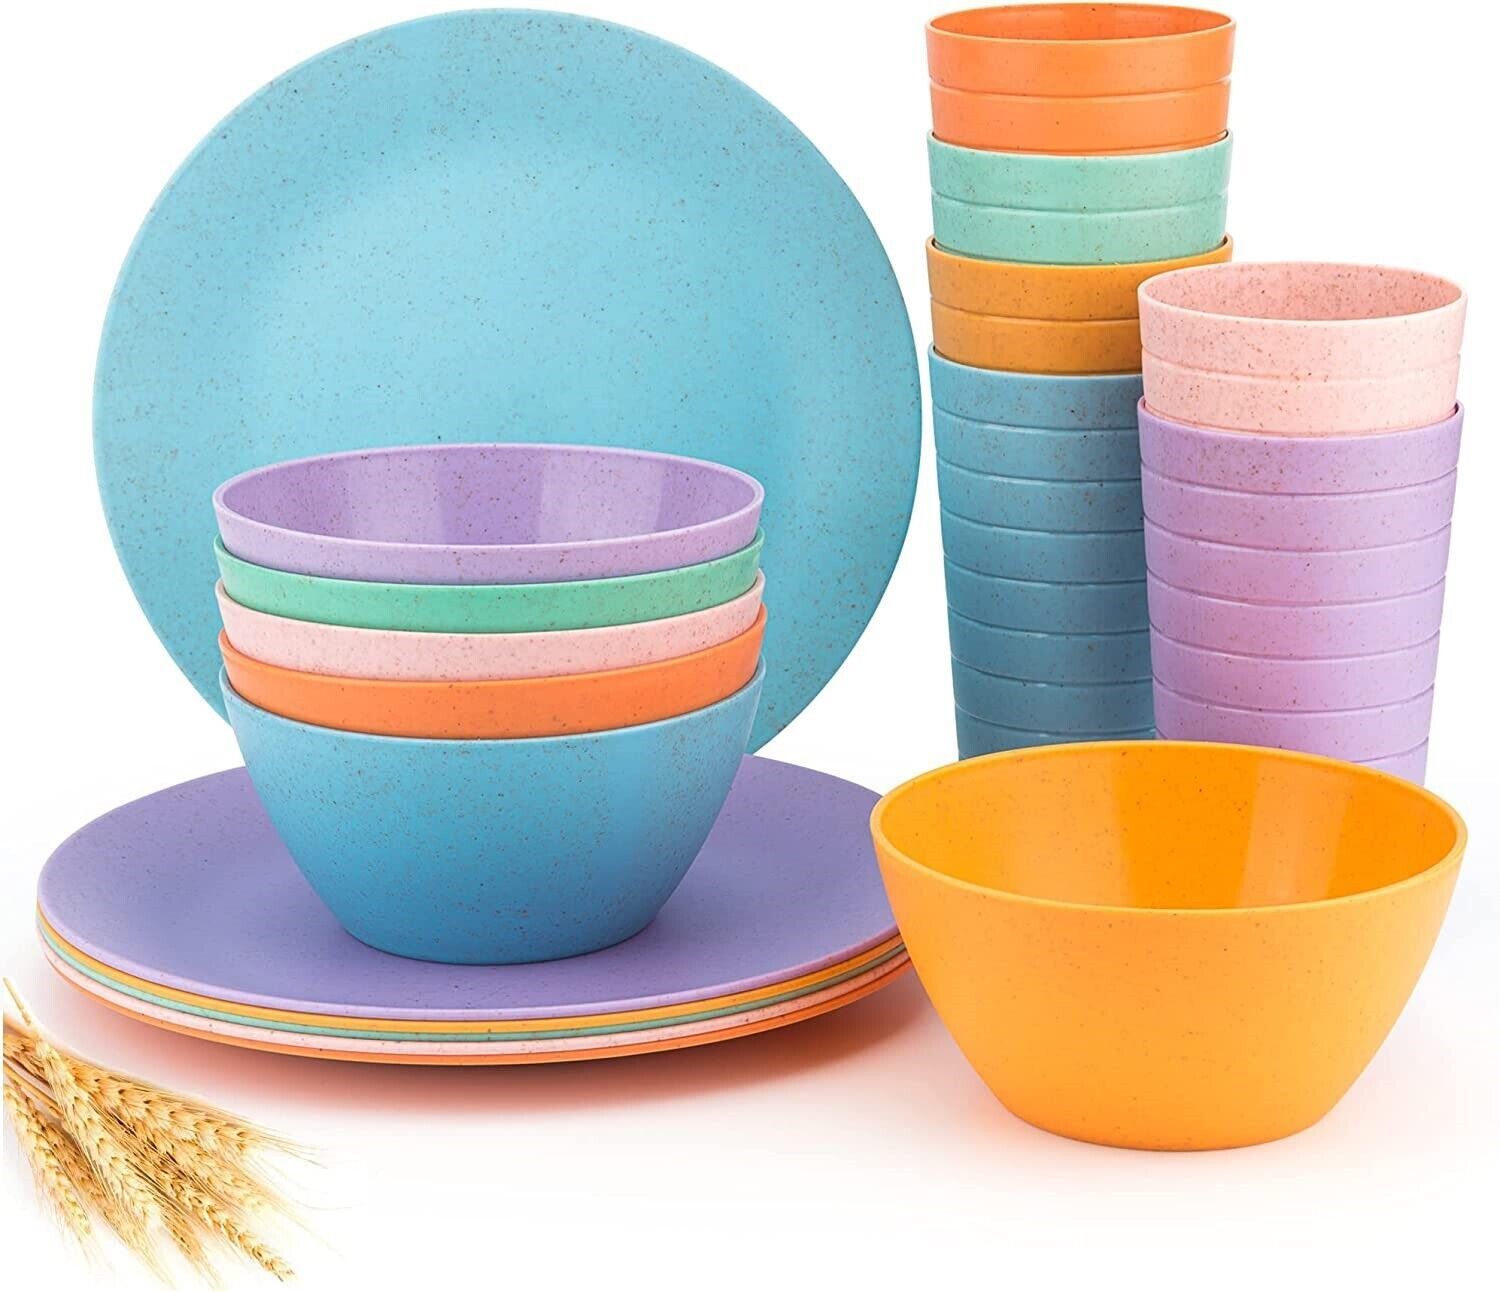 Primary image for Dinnerware Set For 6 Modern Dishes Plates Bowls Cups Tumbler Multicolor 18 Piece